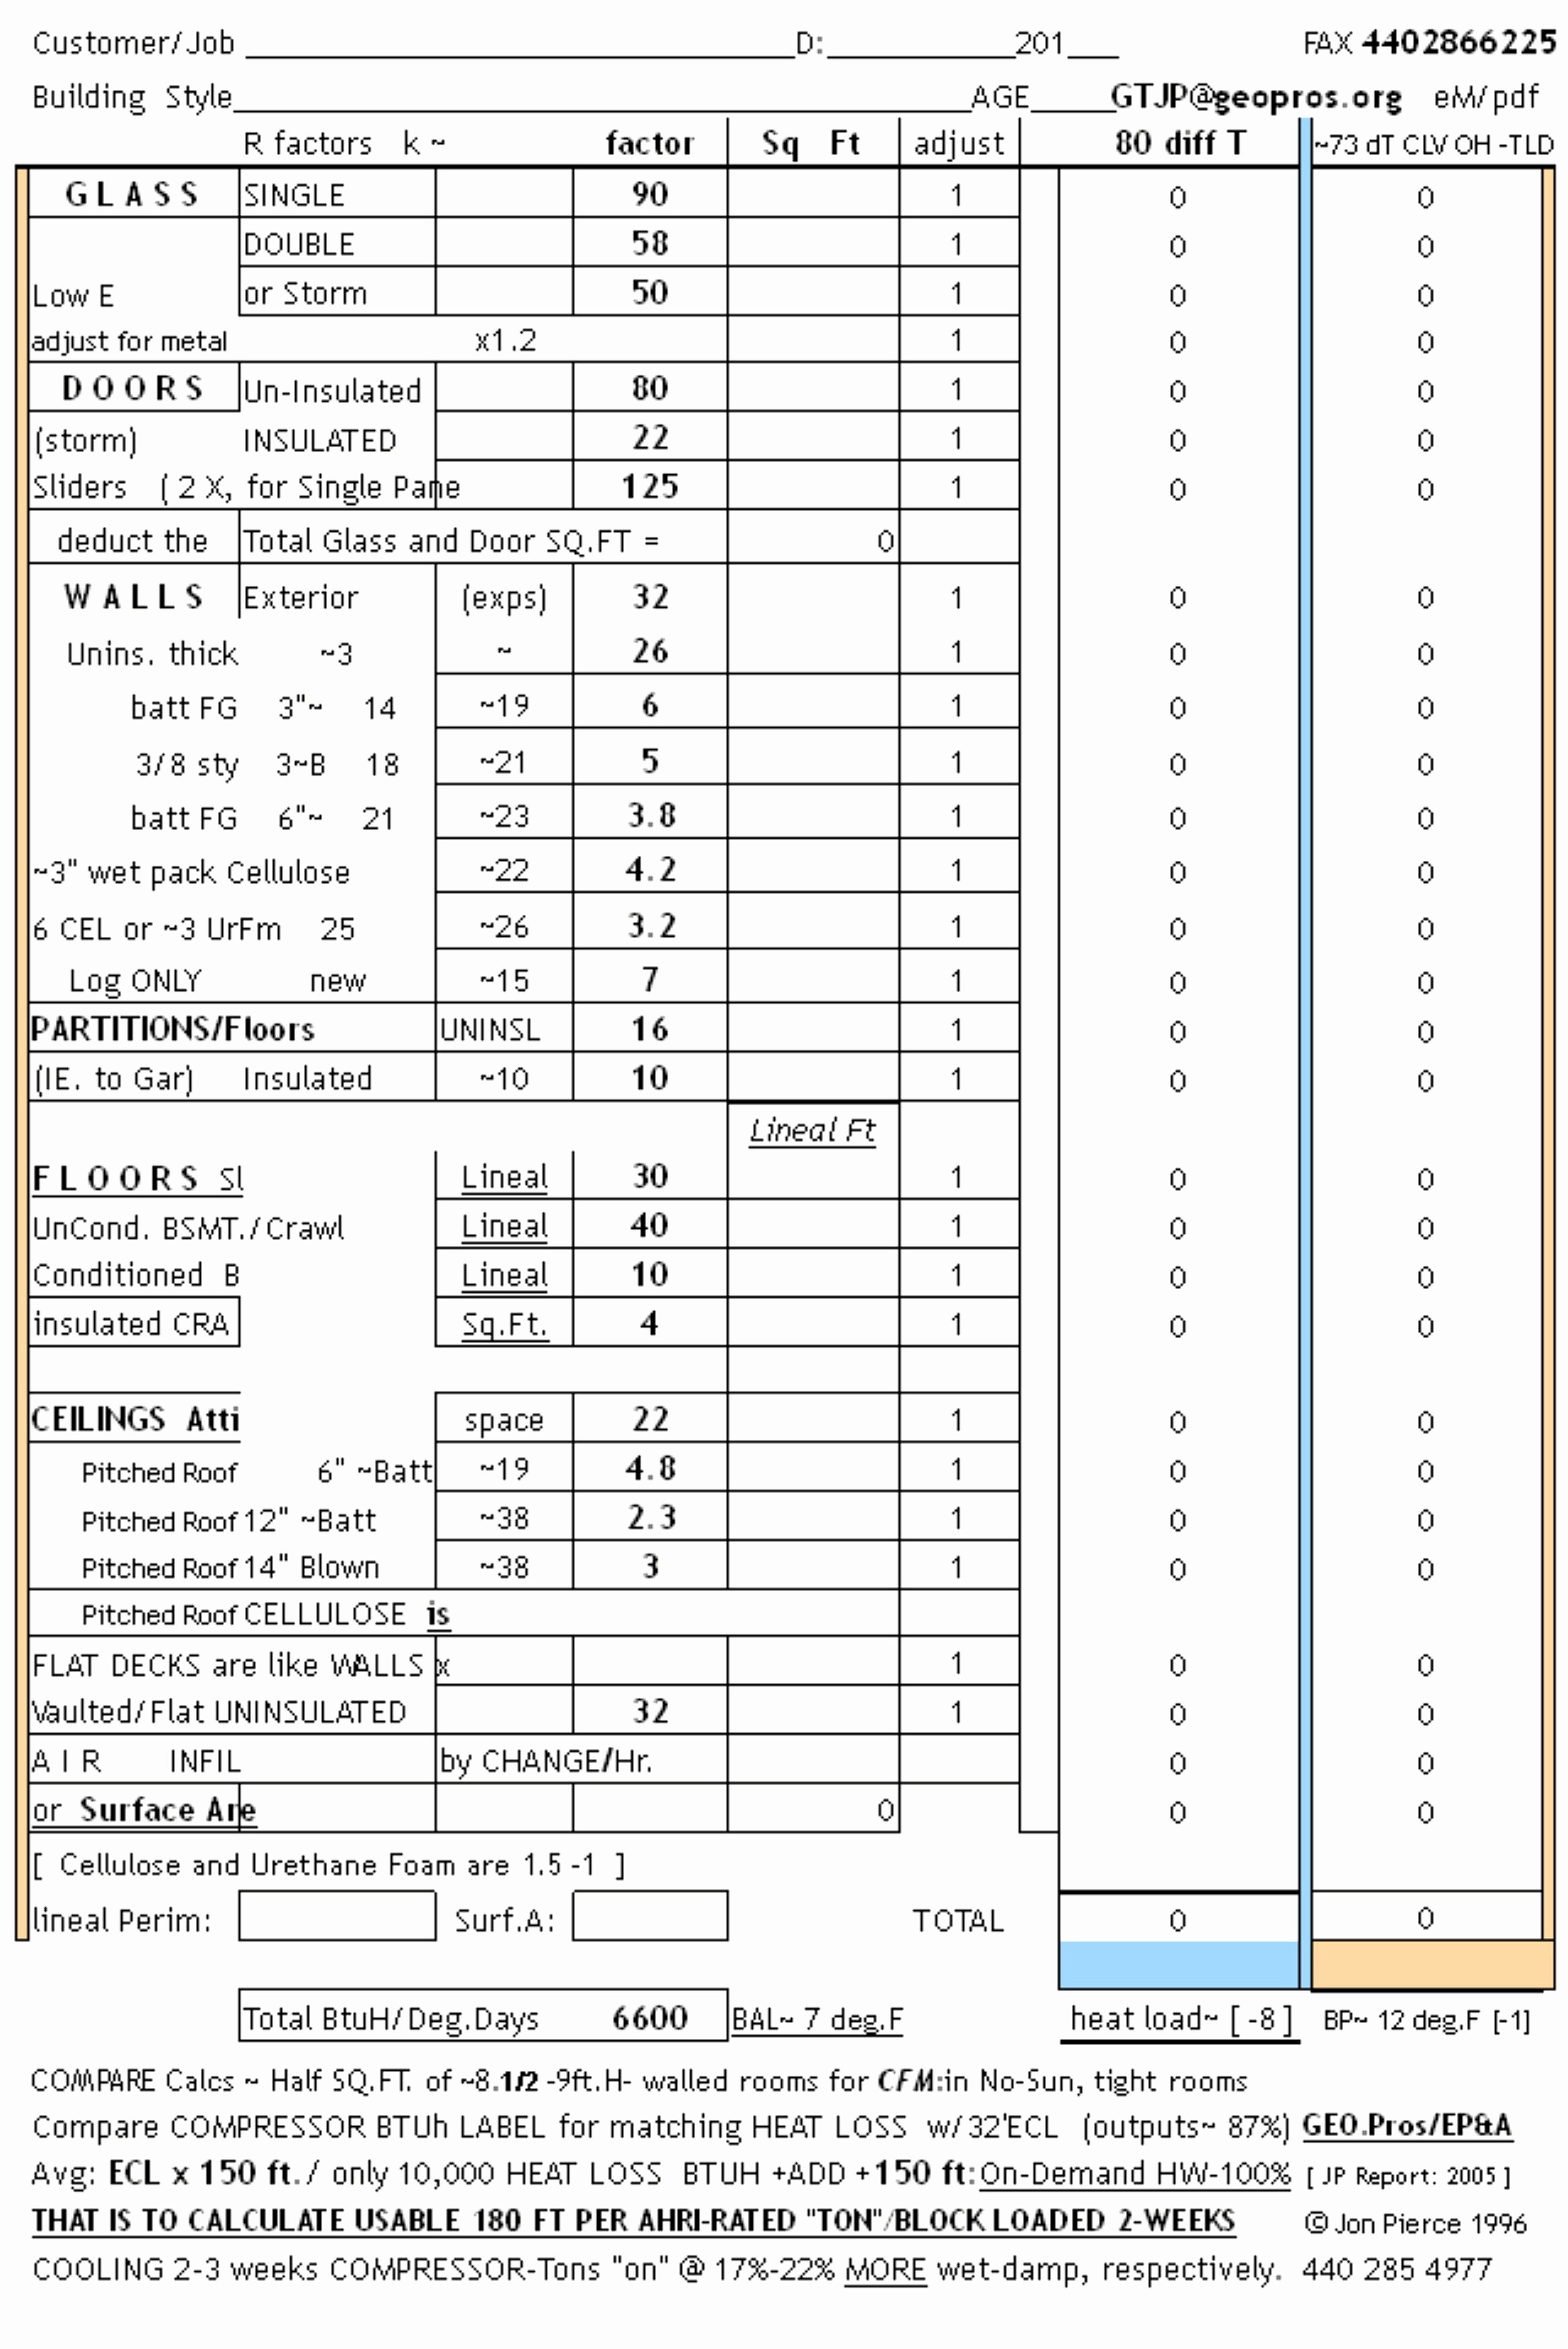 Electrical Panel Load Calculation Spreadsheet Inspirational Nec Document